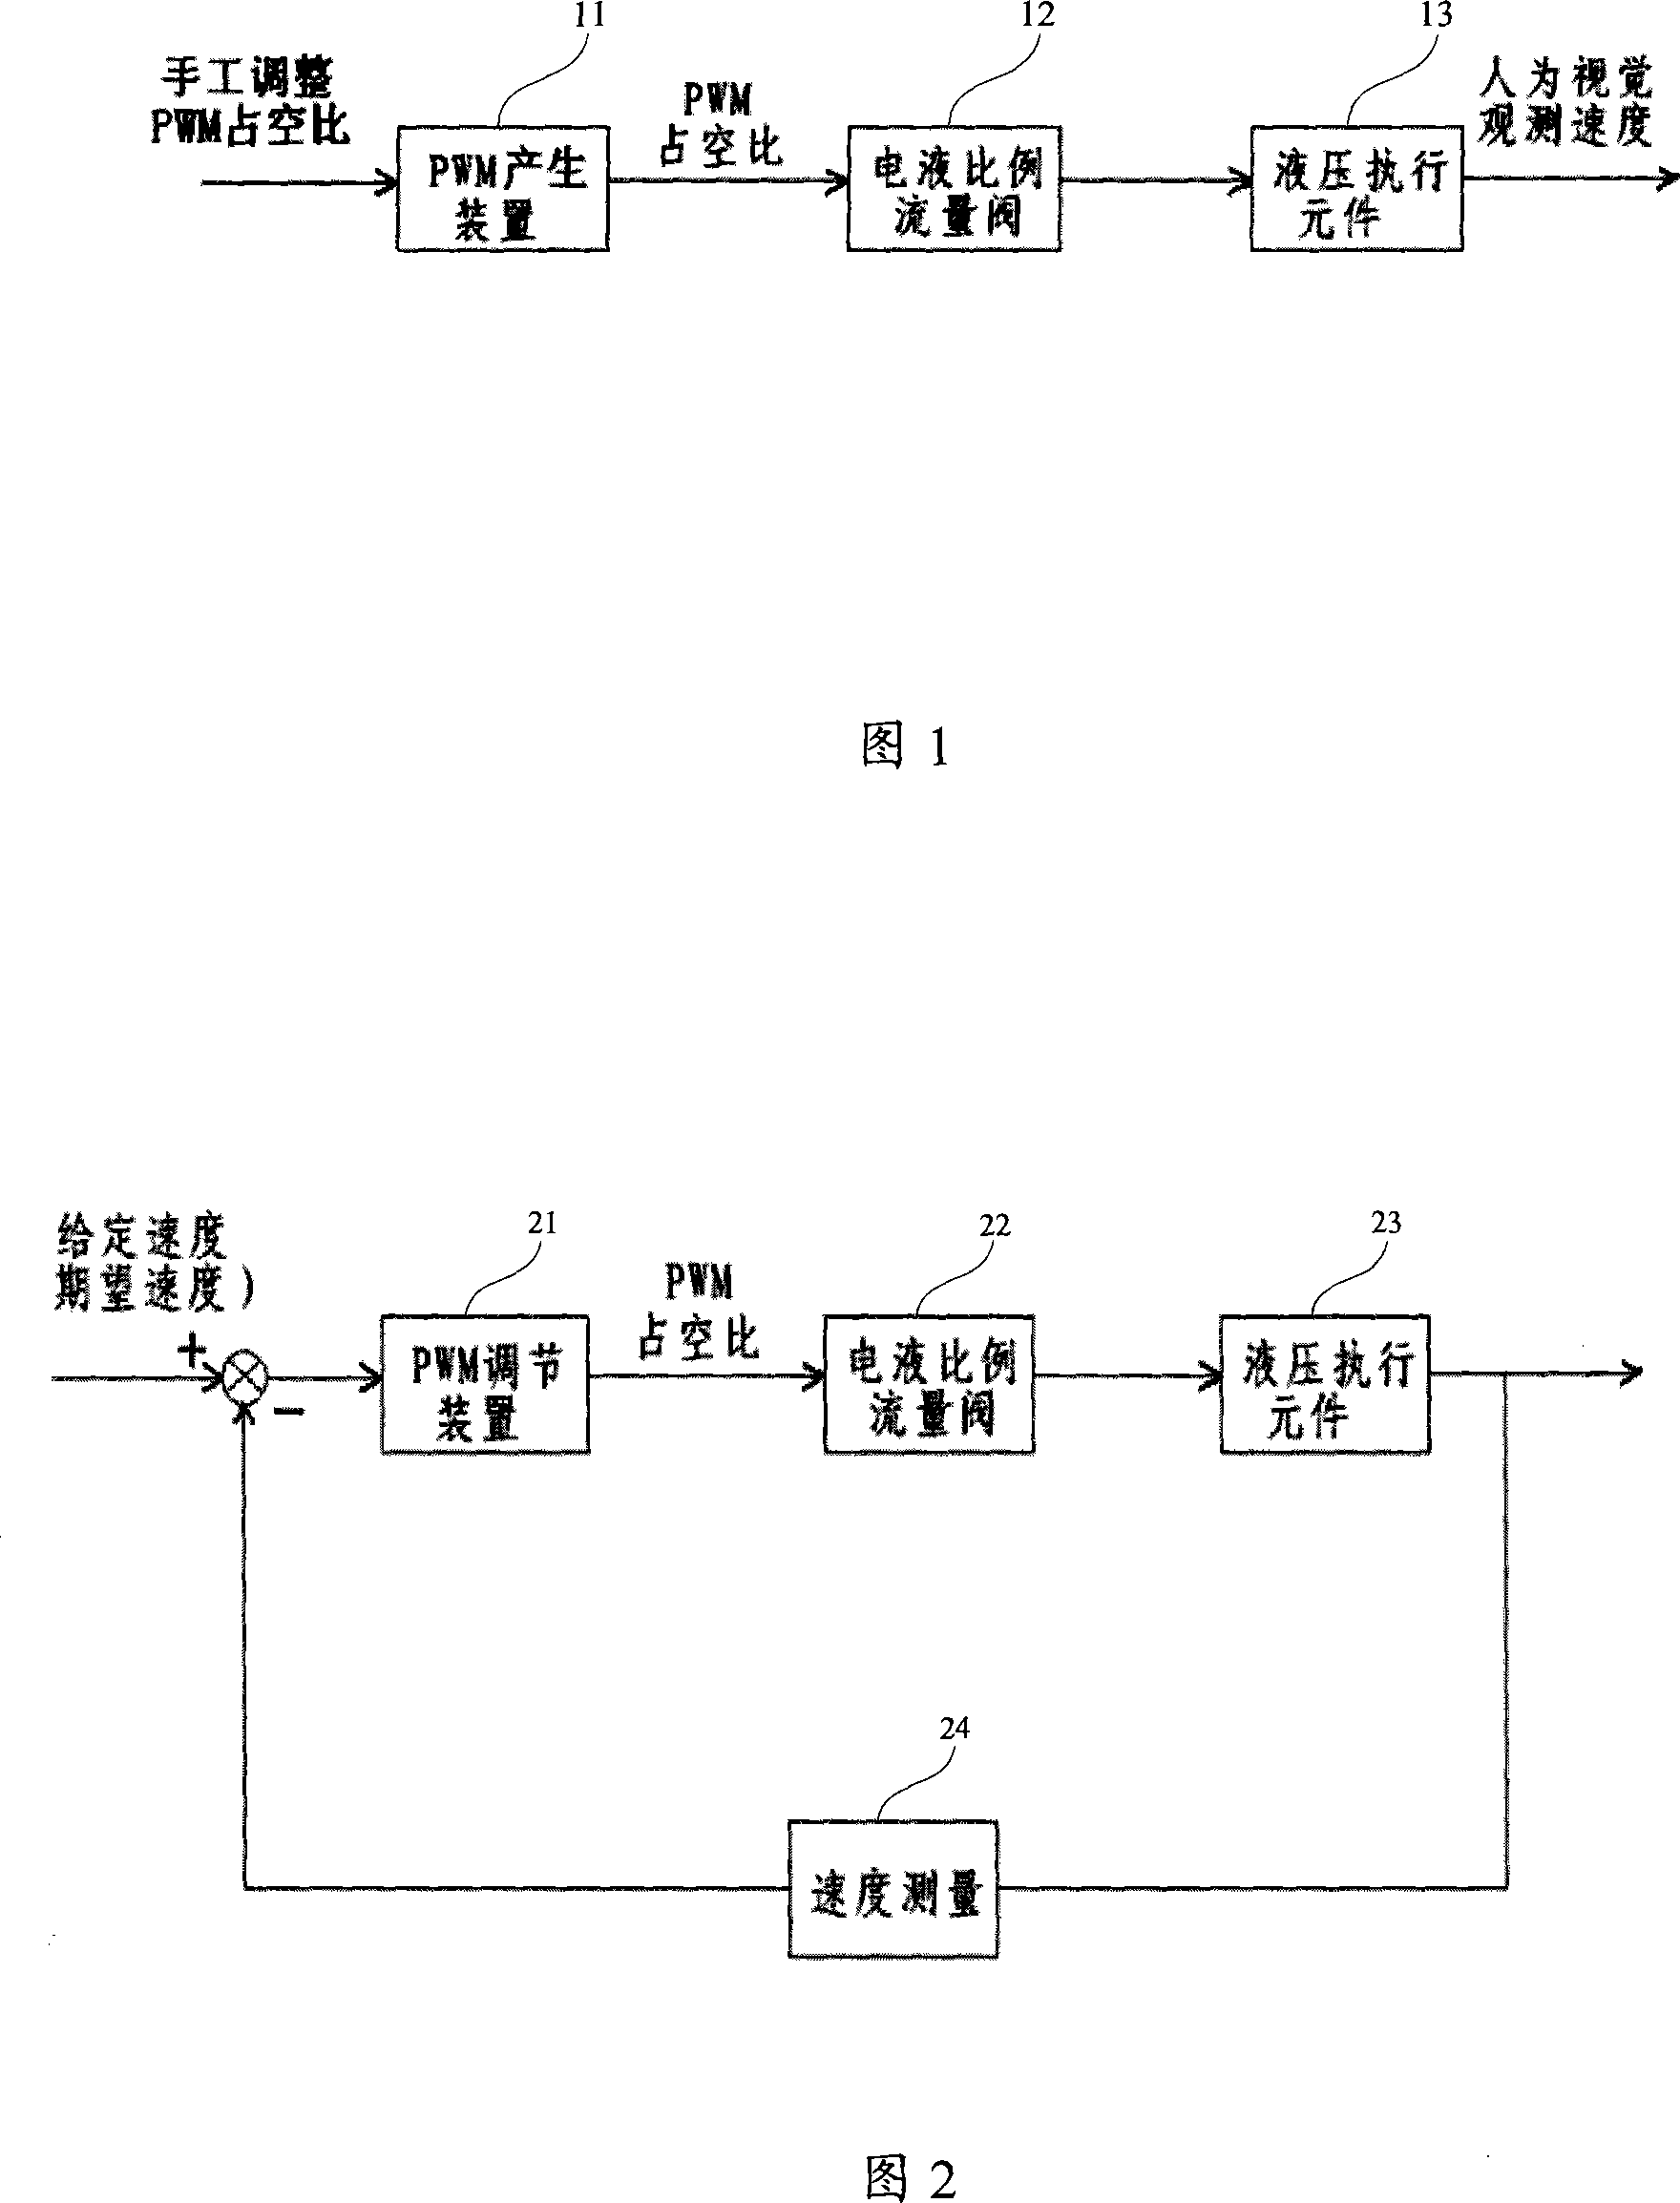 Electro-hydraulic proportional flow valve speed regulating control system and method